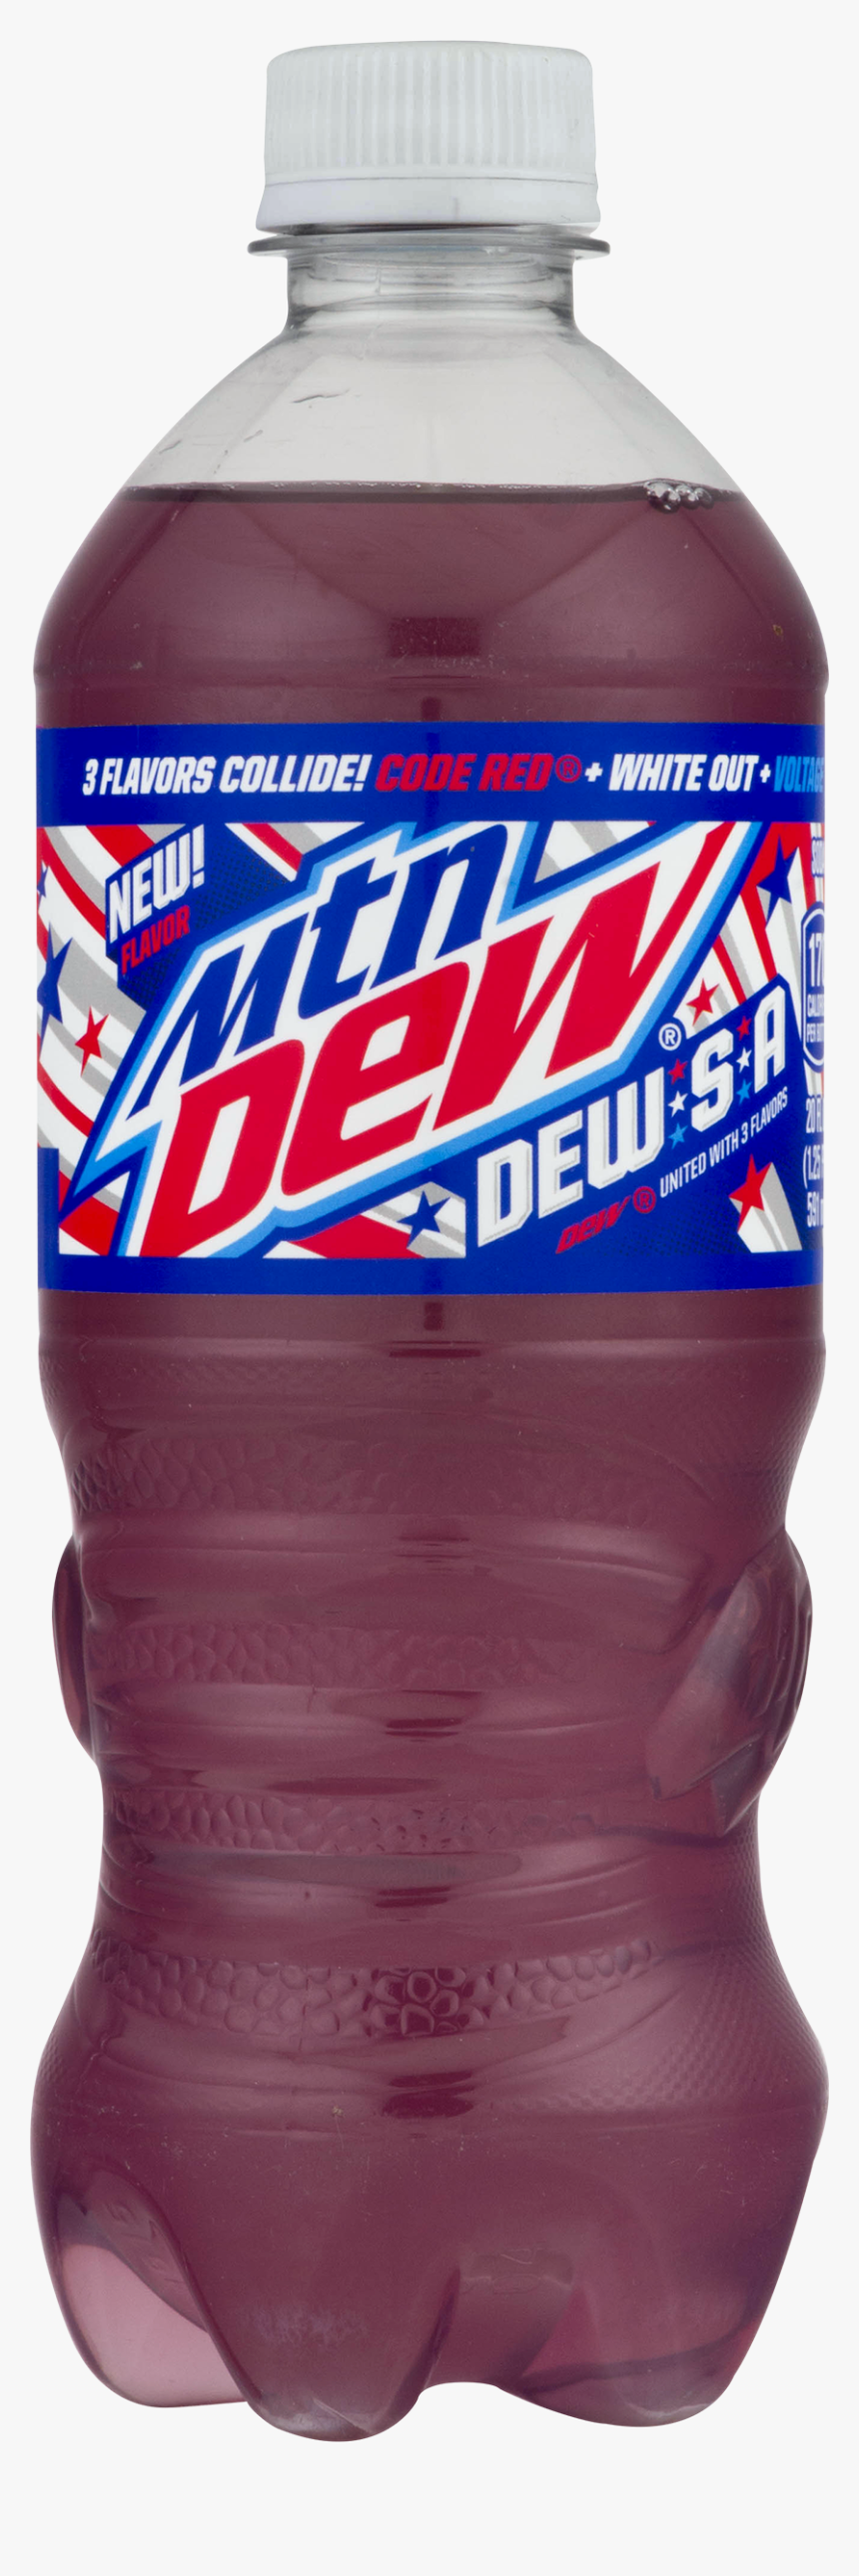 Mountain Dew Wiki - Mountain Dew White Out, HD Png Download, Free Download